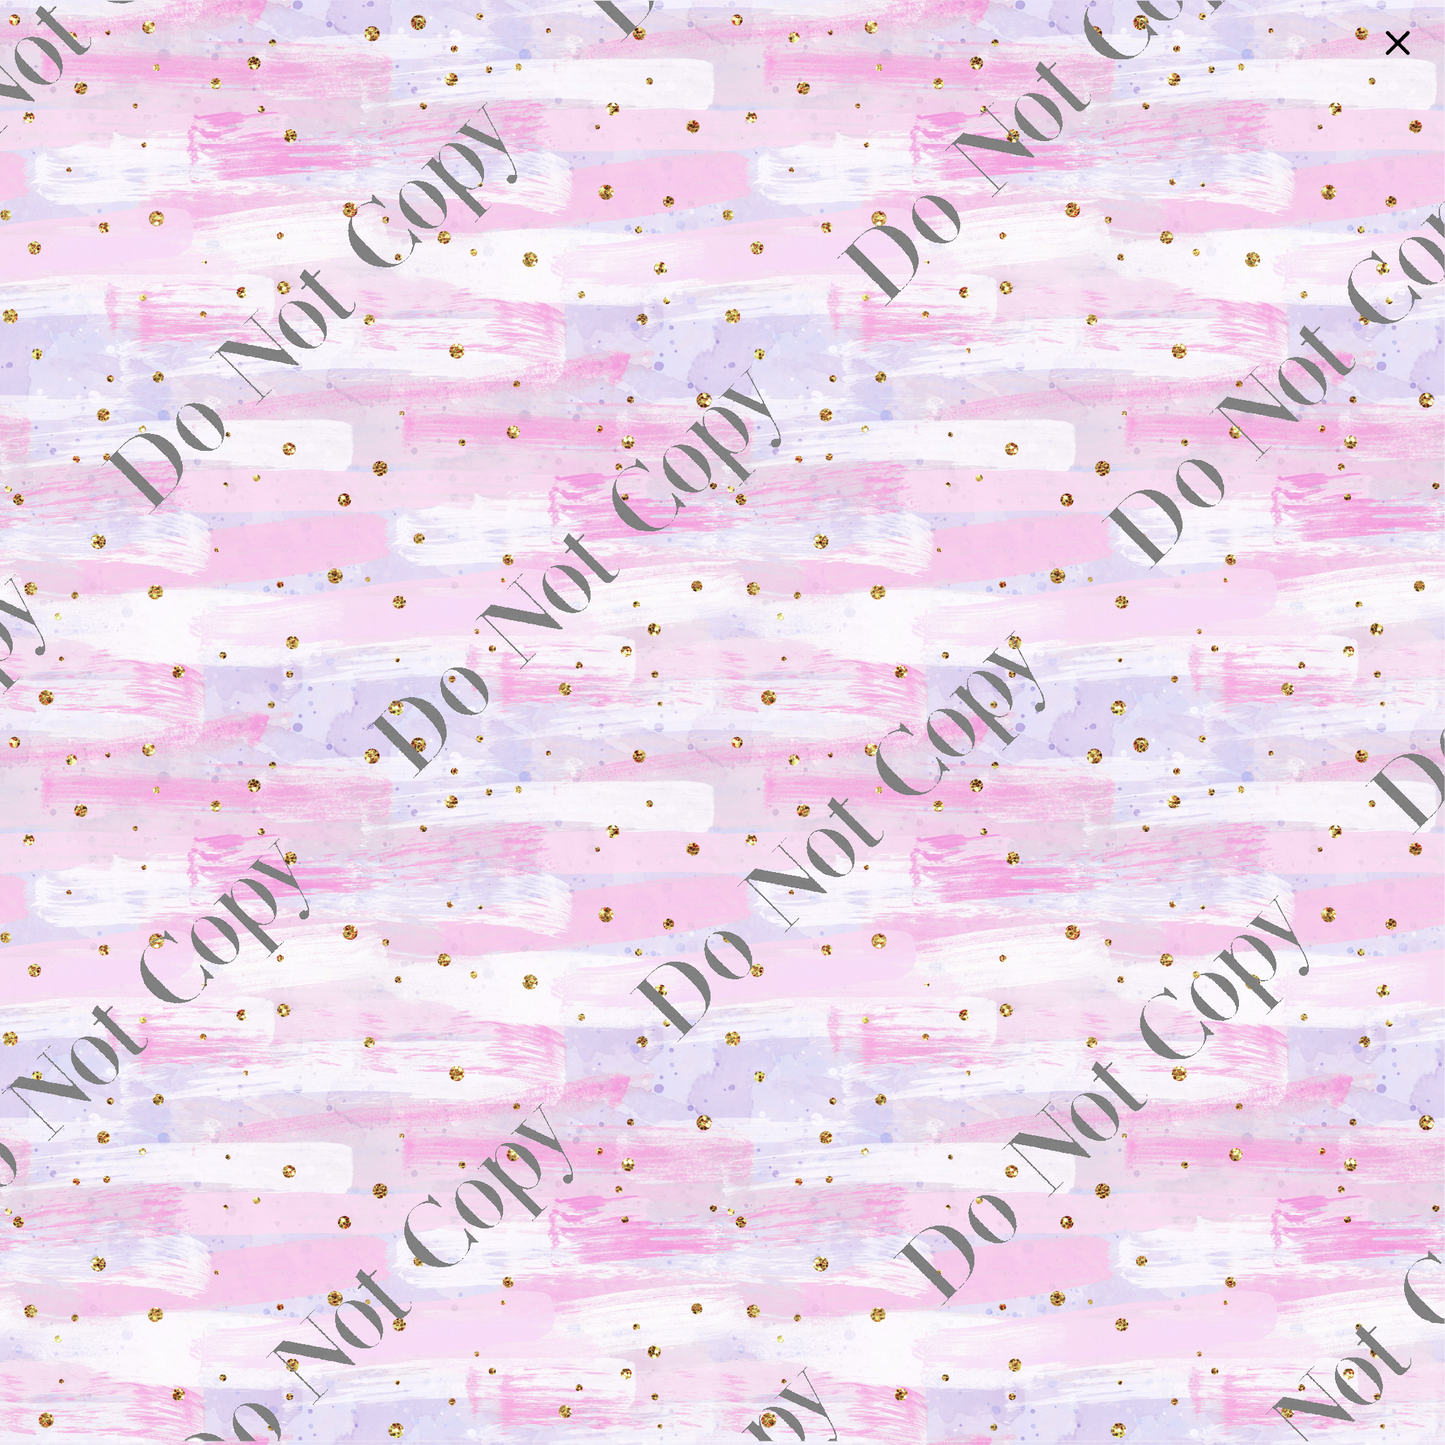 Patterned Vinyl - Pink, Lilac and Gold spots